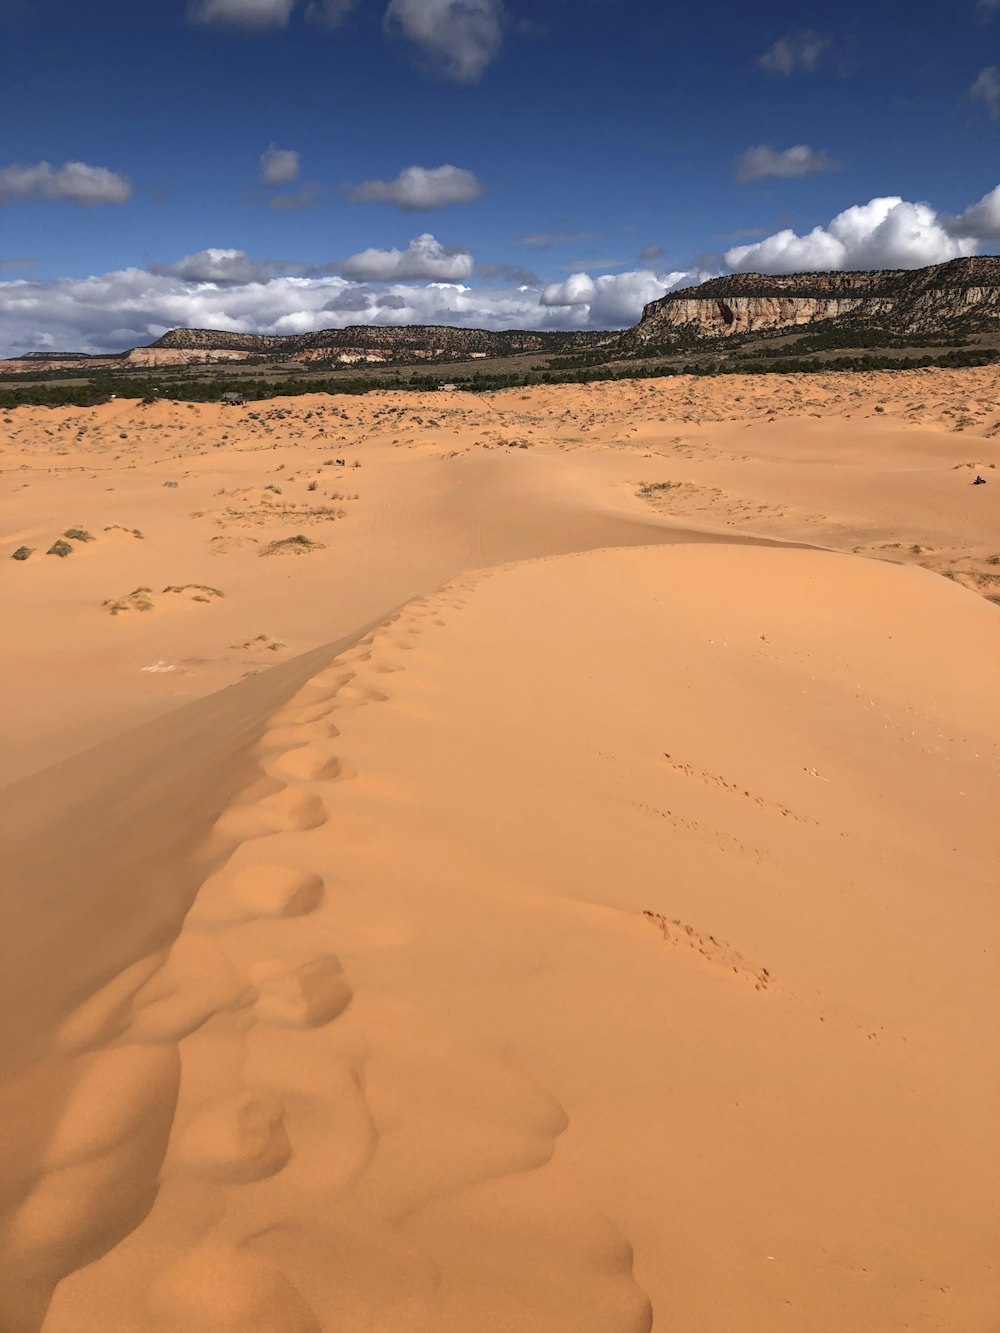 a large sandy area with a mountain in the background